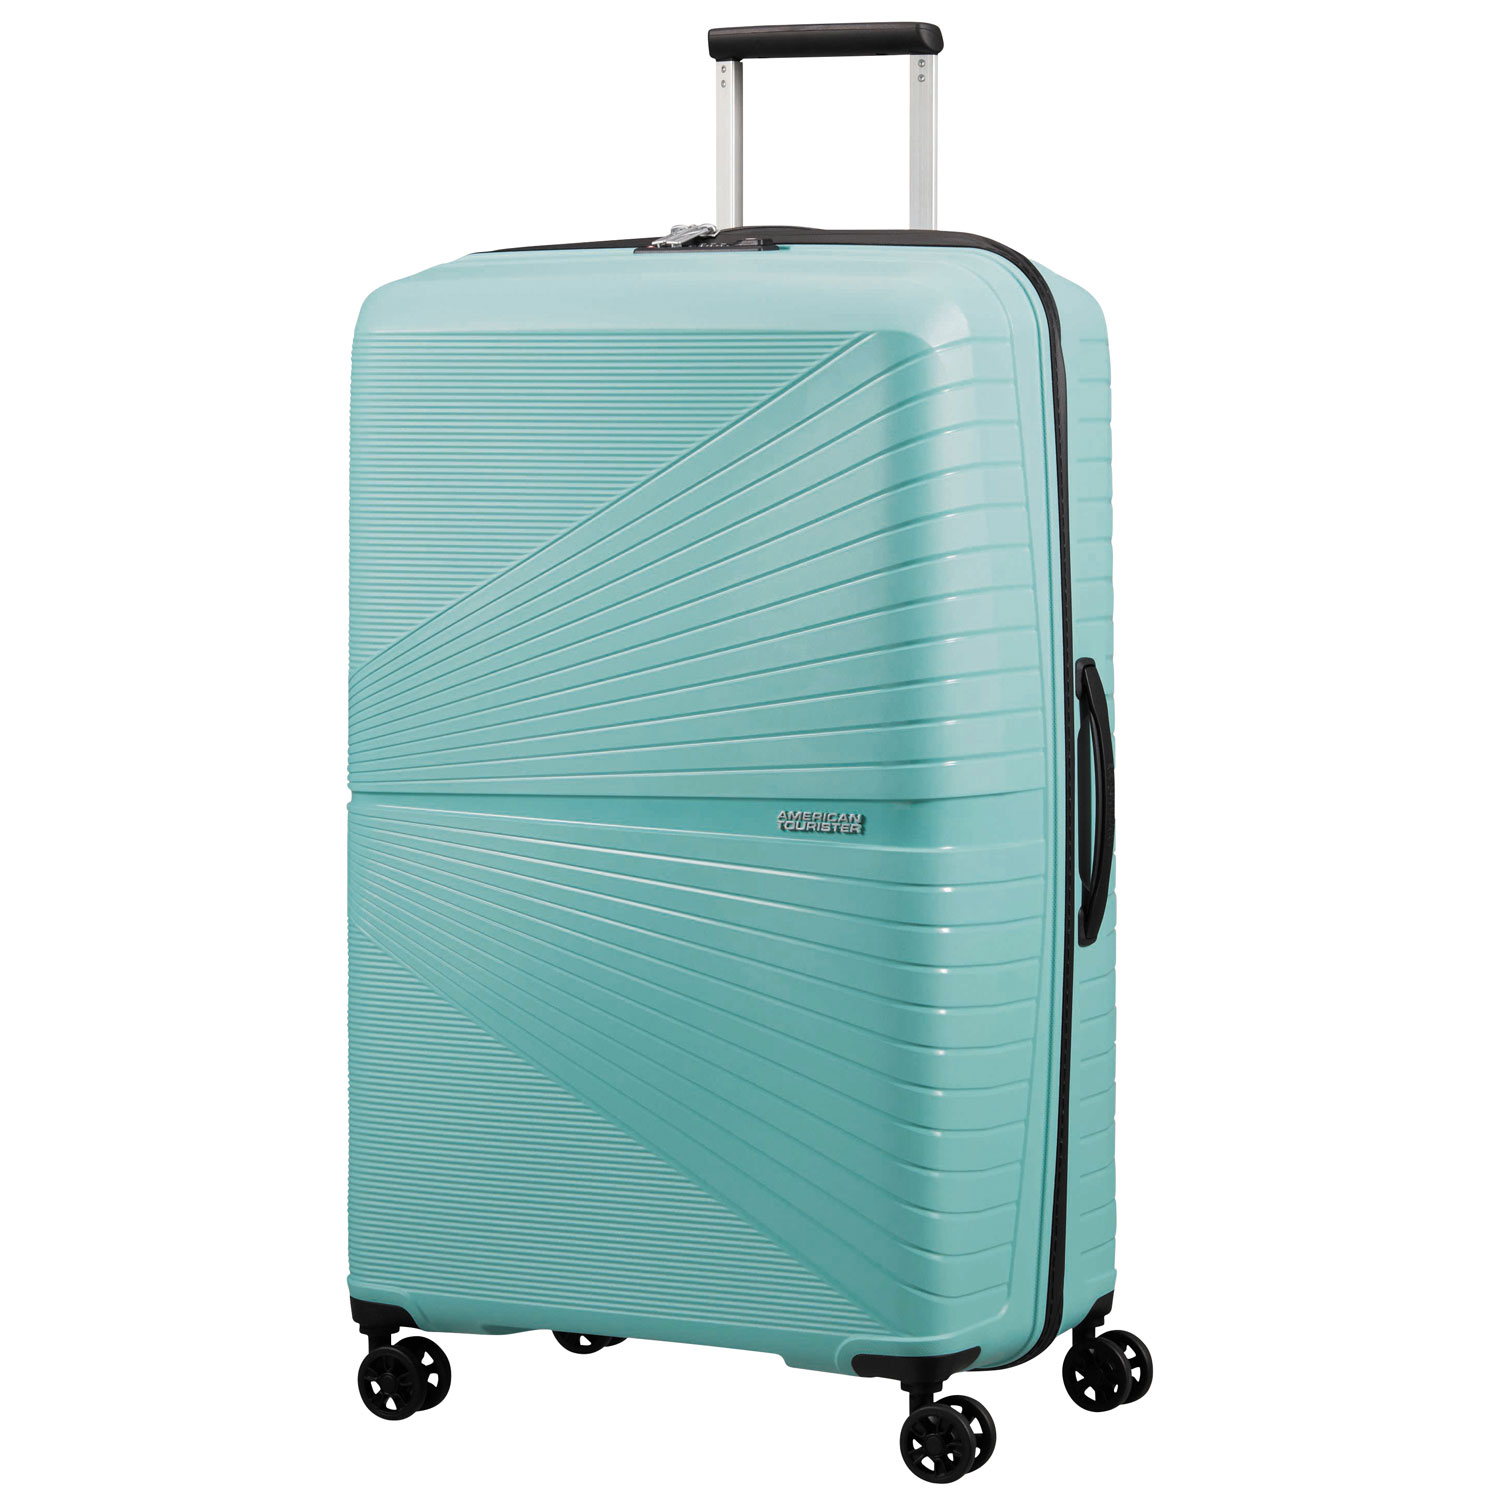 American Tourister Airconic 28" Hard Side Carry-On Luggage - Purist Blue